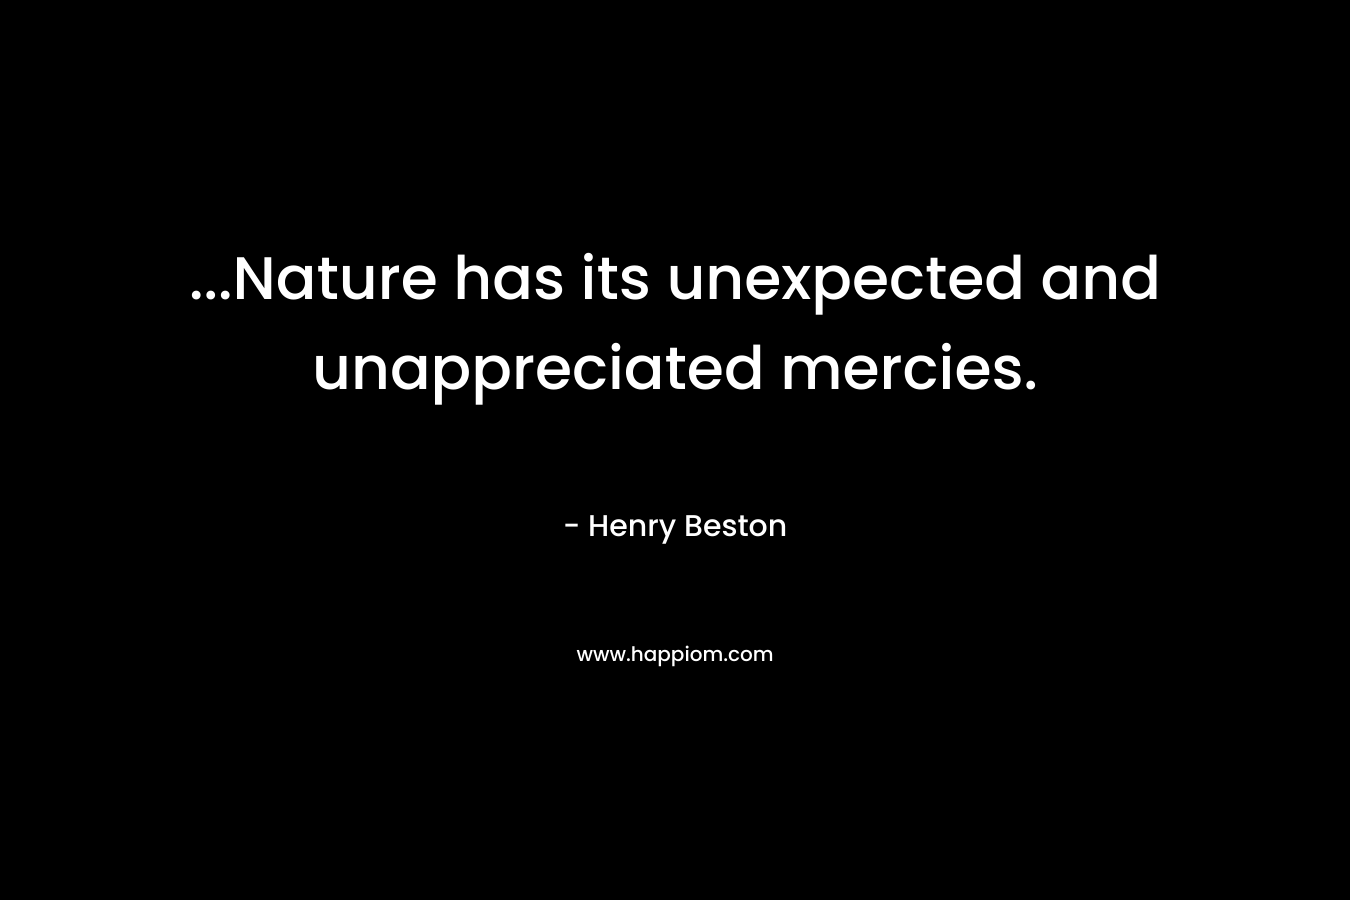 …Nature has its unexpected and unappreciated mercies. – Henry Beston